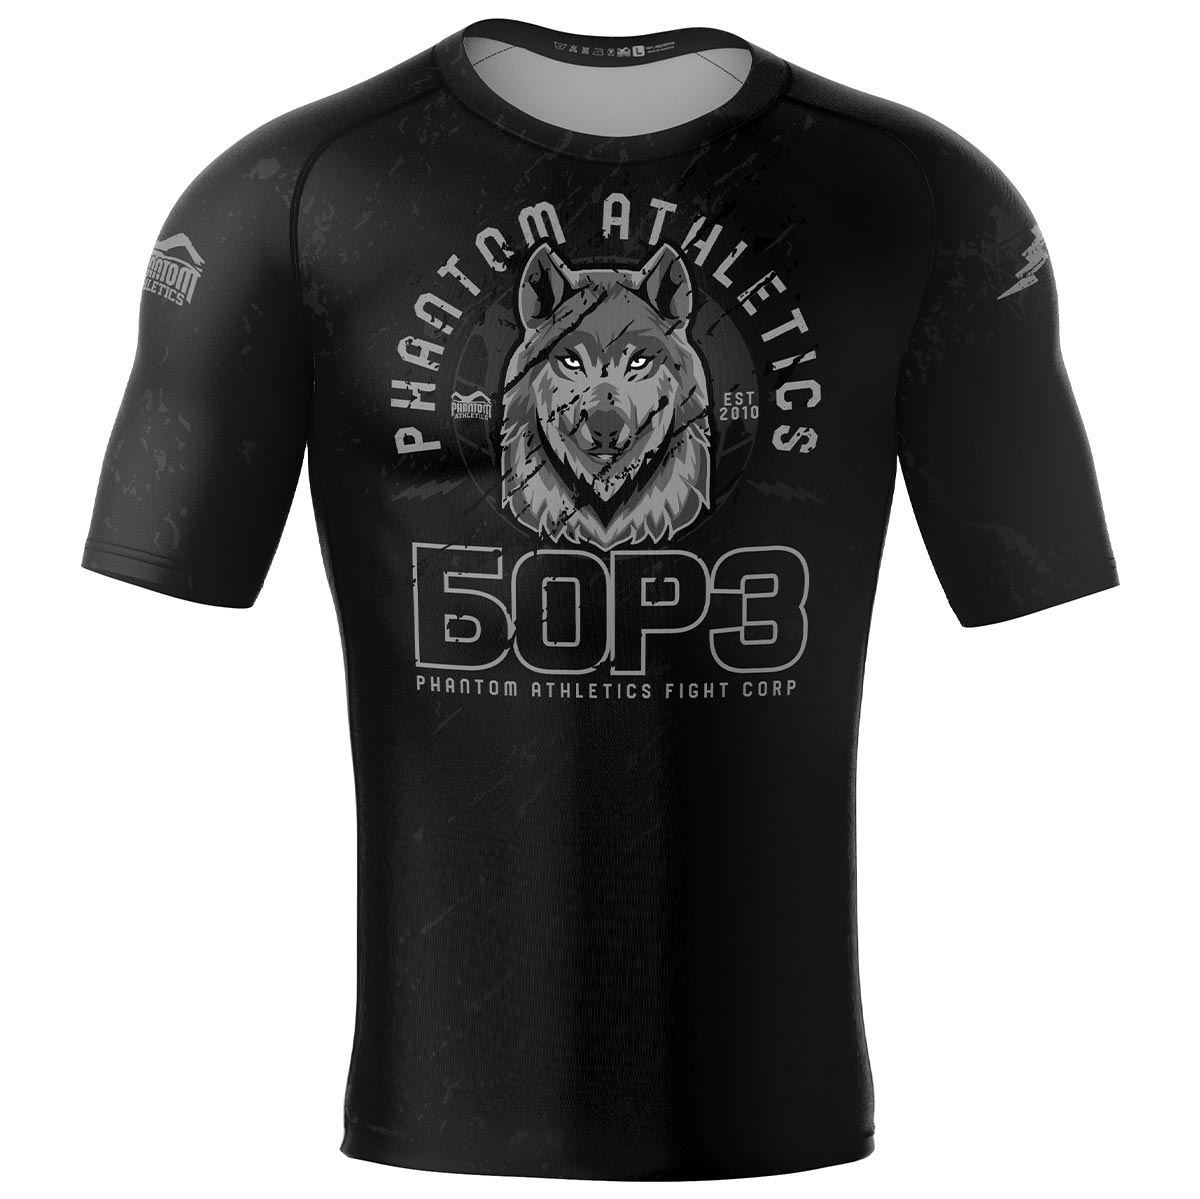 Phantom BORZ БОРЗ Rashguard. The ideal compression shirt for your martial arts. In Chechnya wolf design with Russian WOLF lettering. Perfect for MMA, Muay Thai, kickboxing, wrestling and grappling.